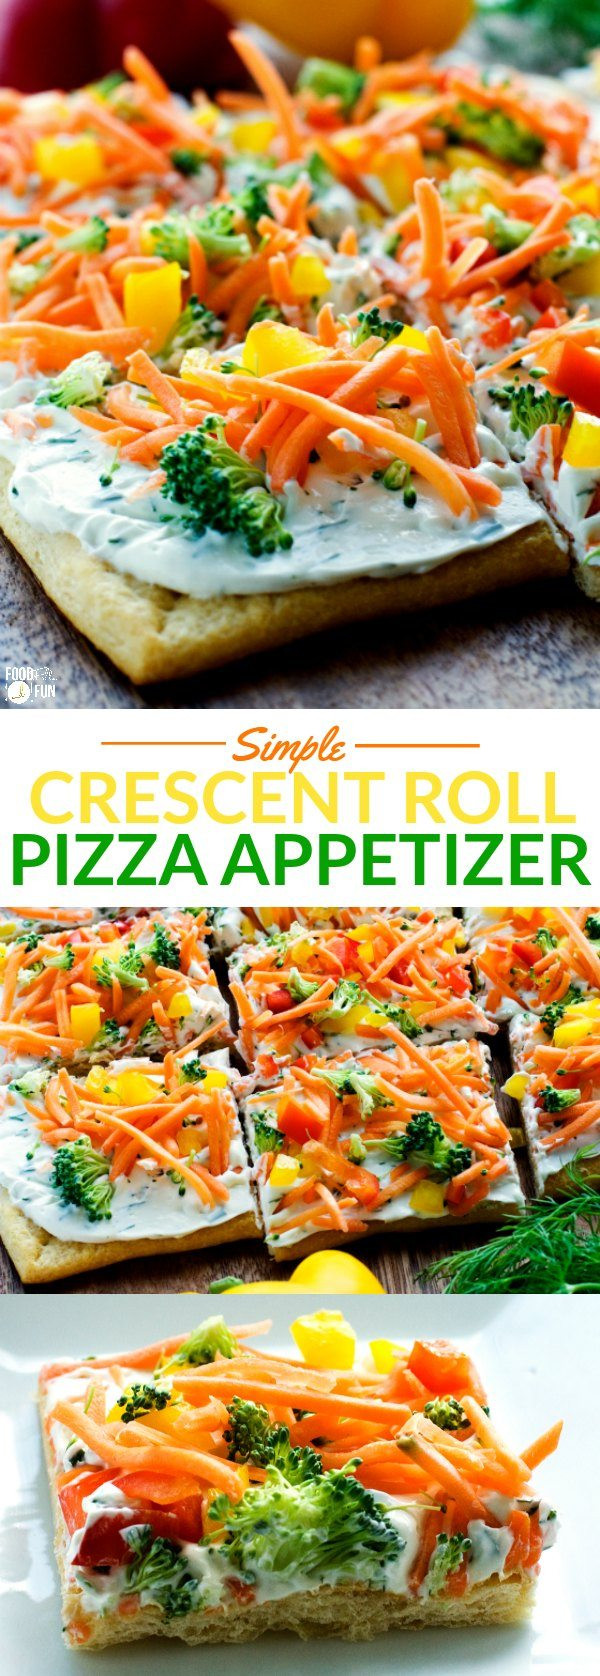 Appetizers With Crescent Rolls
 Simple Crescent Roll Pizza Appetizer • Food Folks and Fun